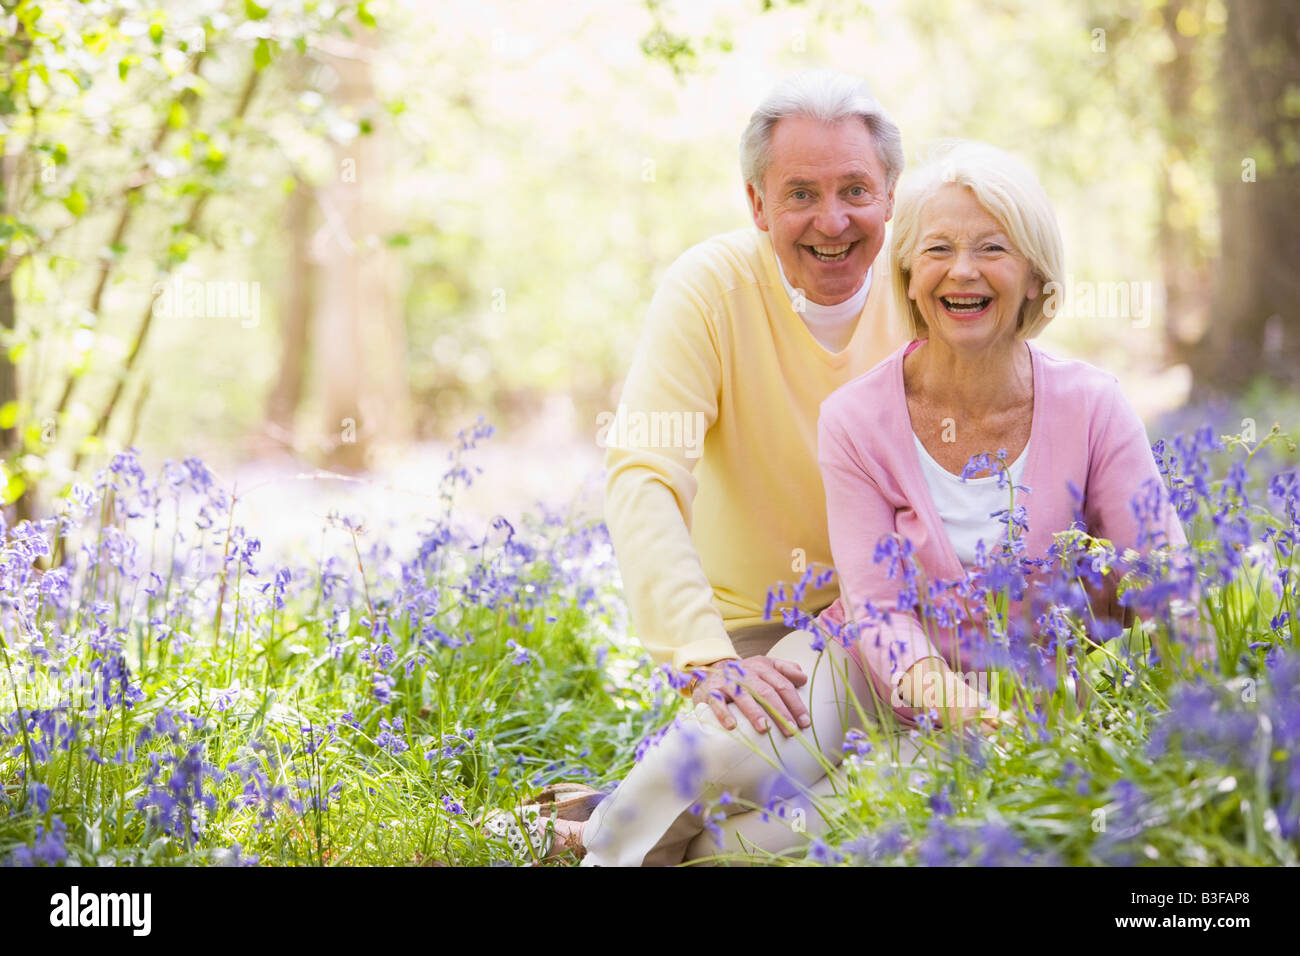 Couple sitting outdoors with flowers smiling Stock Photo